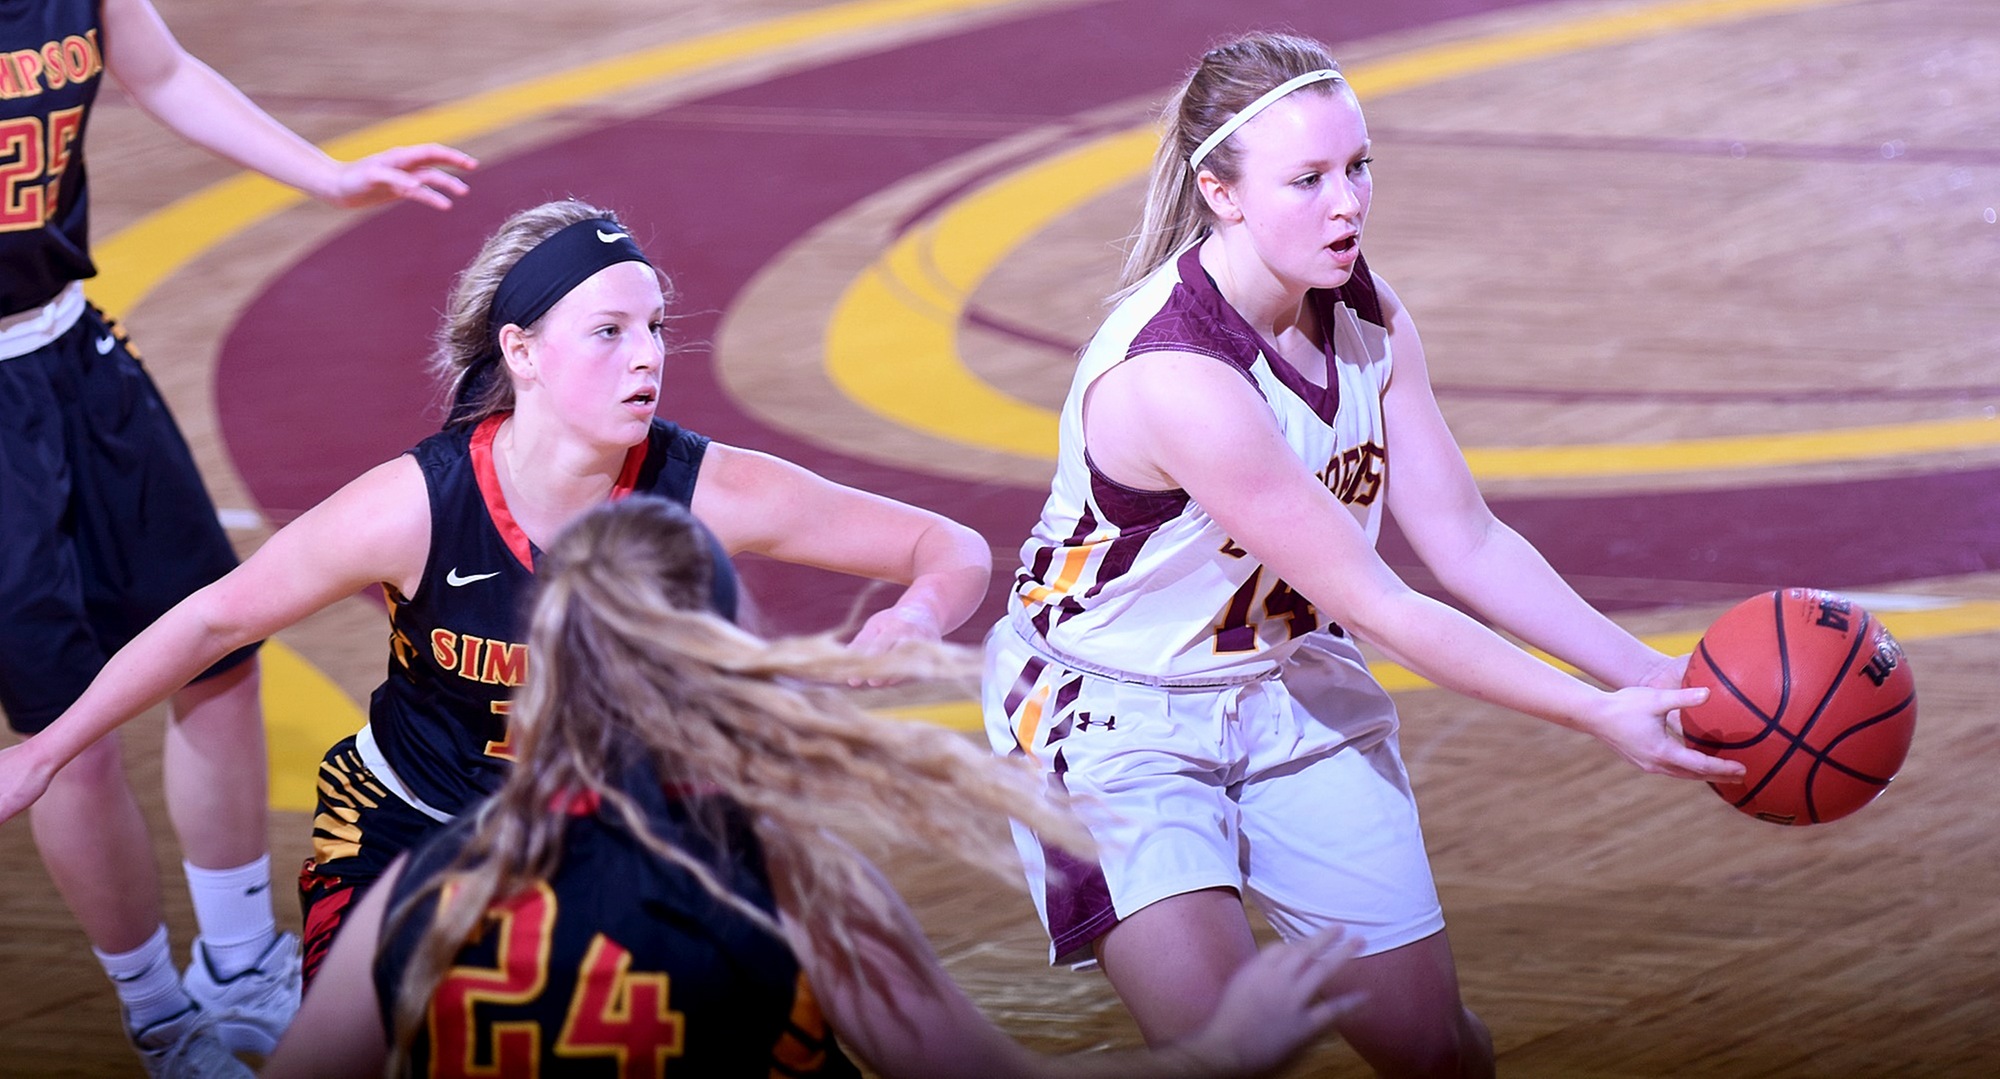 Freshman Avery Sundeen hands the ball off to a teammate during the second half of the Cobbers' non-conference game with Simpson. Sundeen finished with a career-high 14 points.